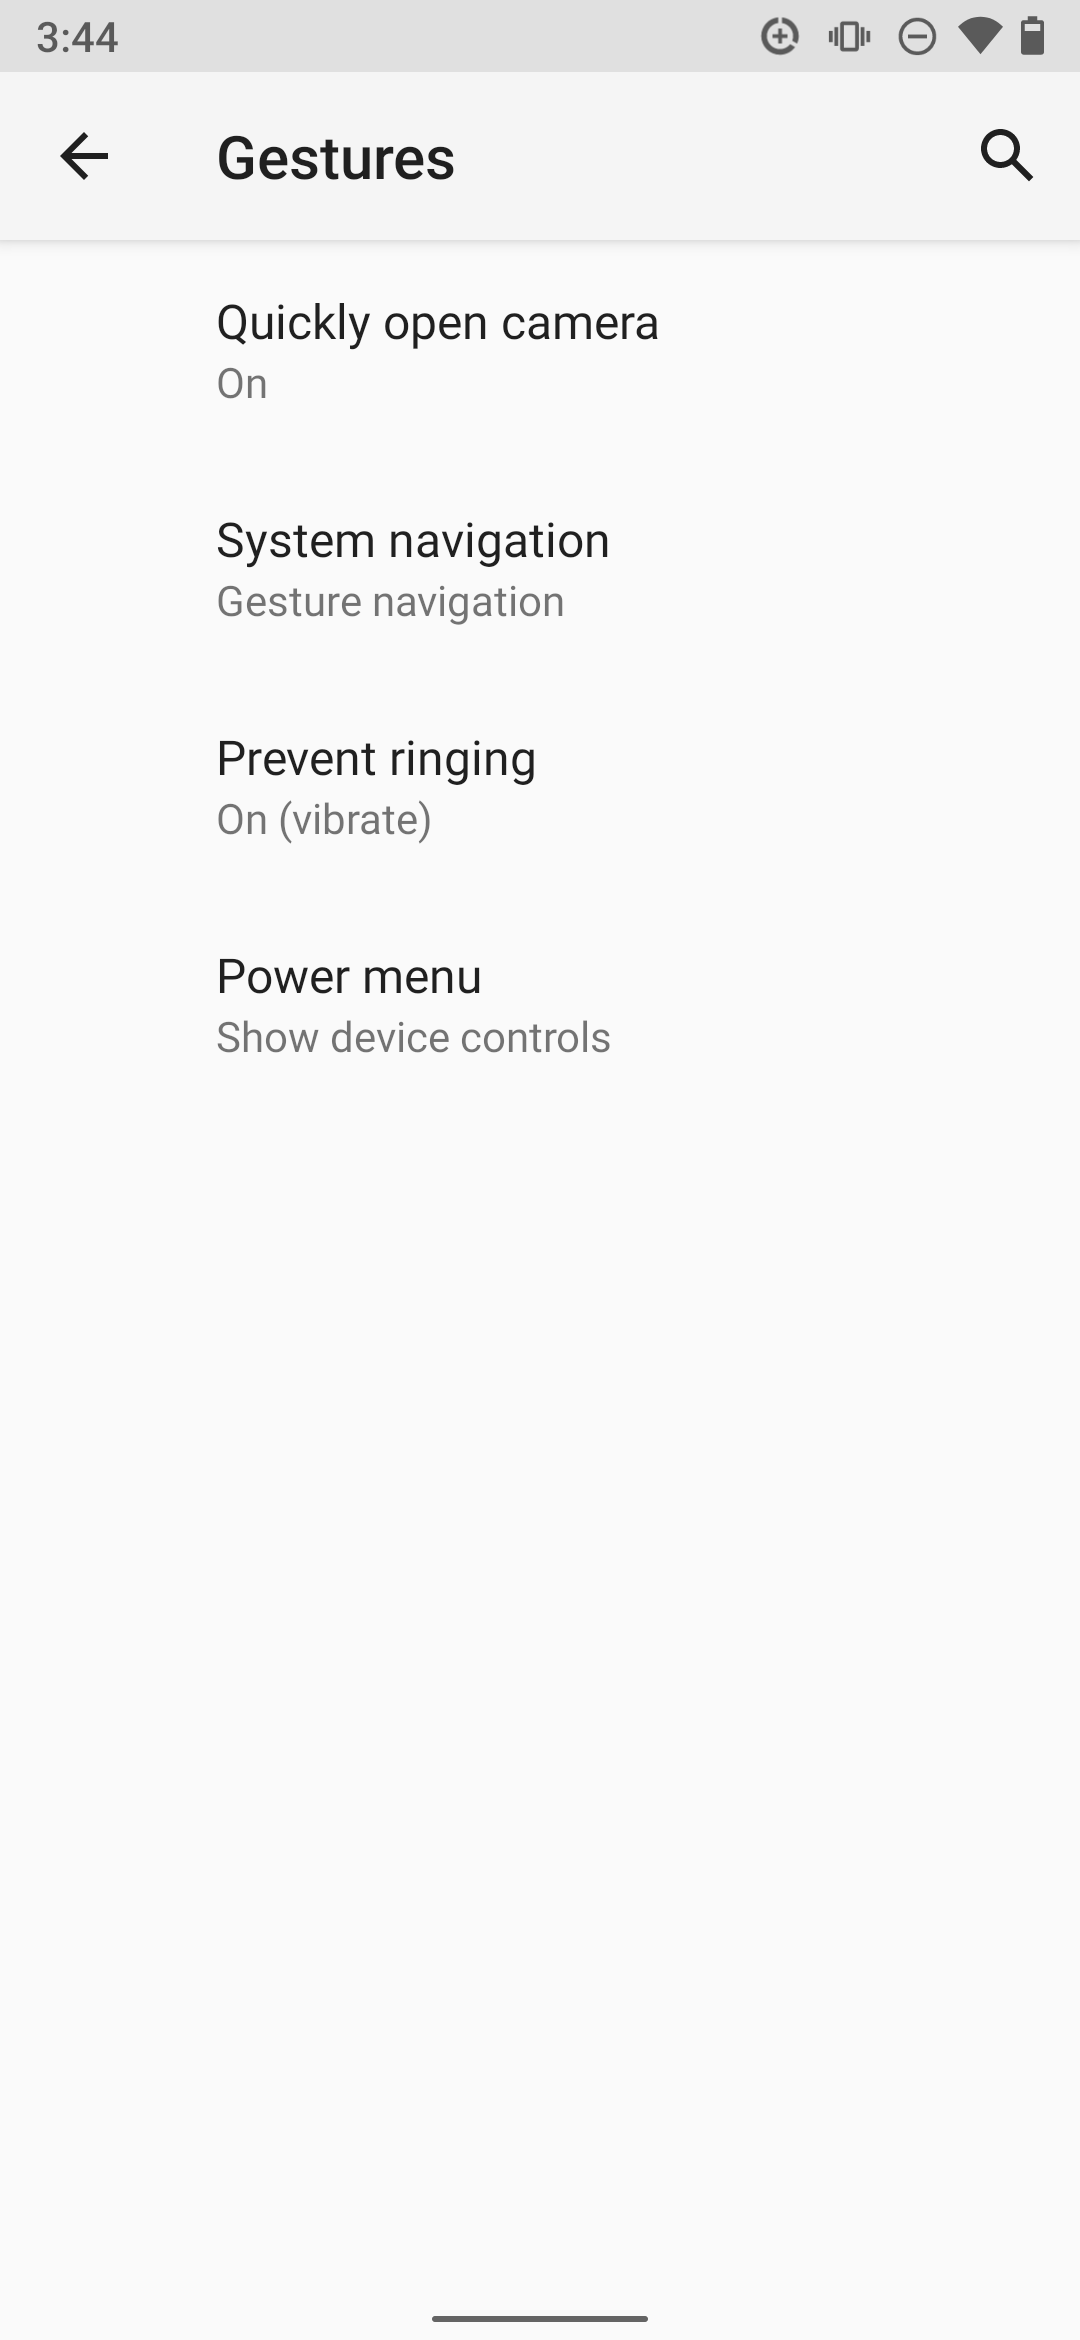 gestures are in the settings menu under system navigation